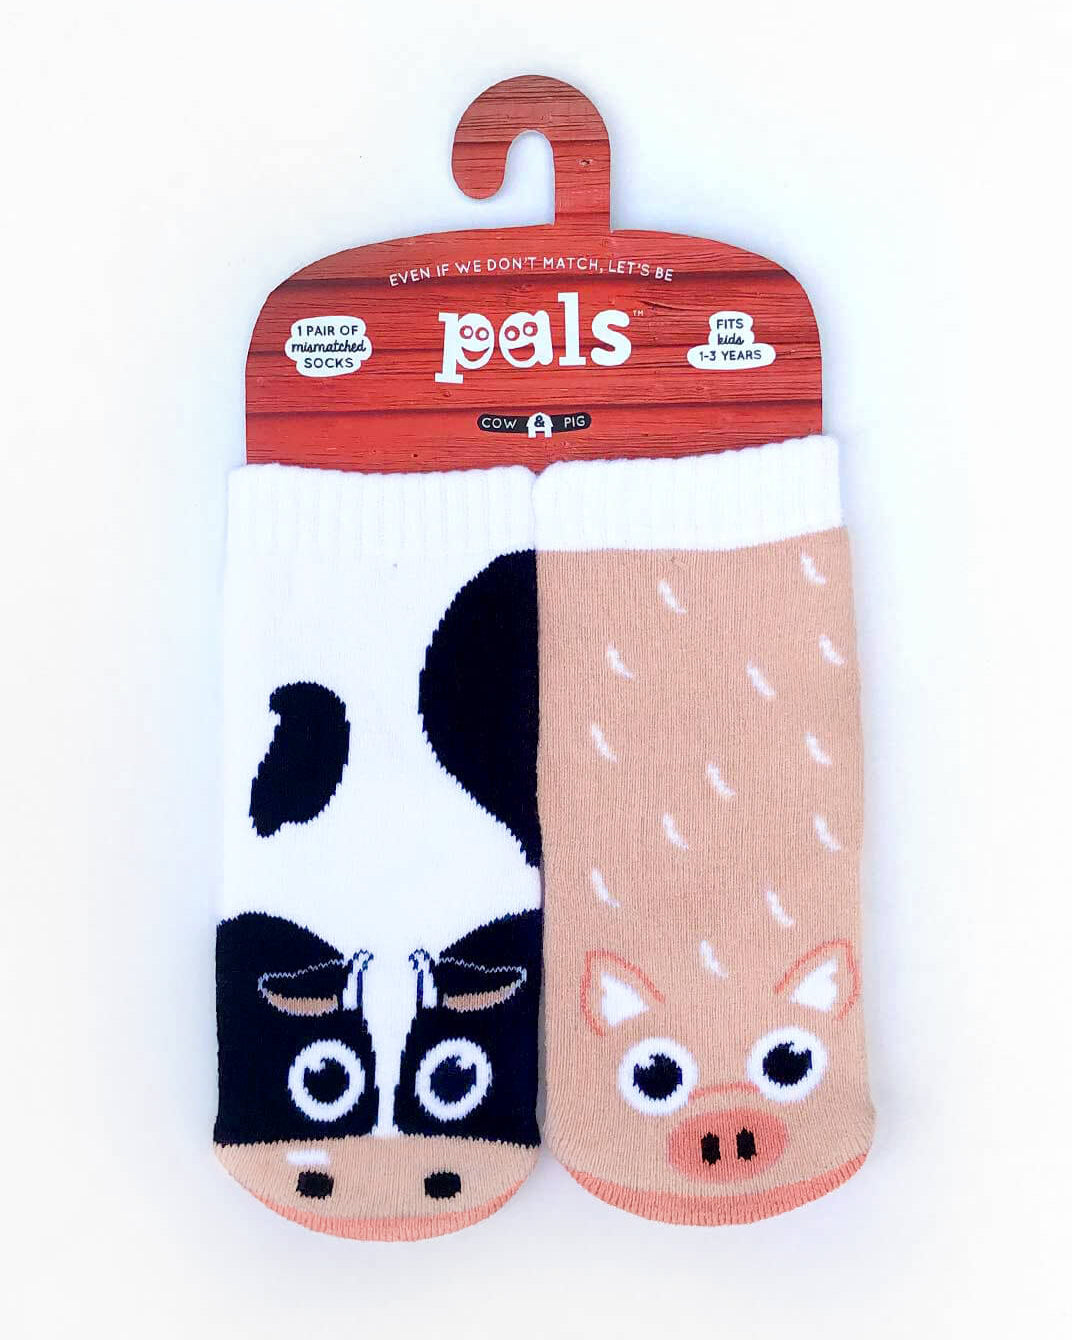 Fun mismatched socks Cow and Pig-RESTOCK!  A Touch of Magnolia Boutique   